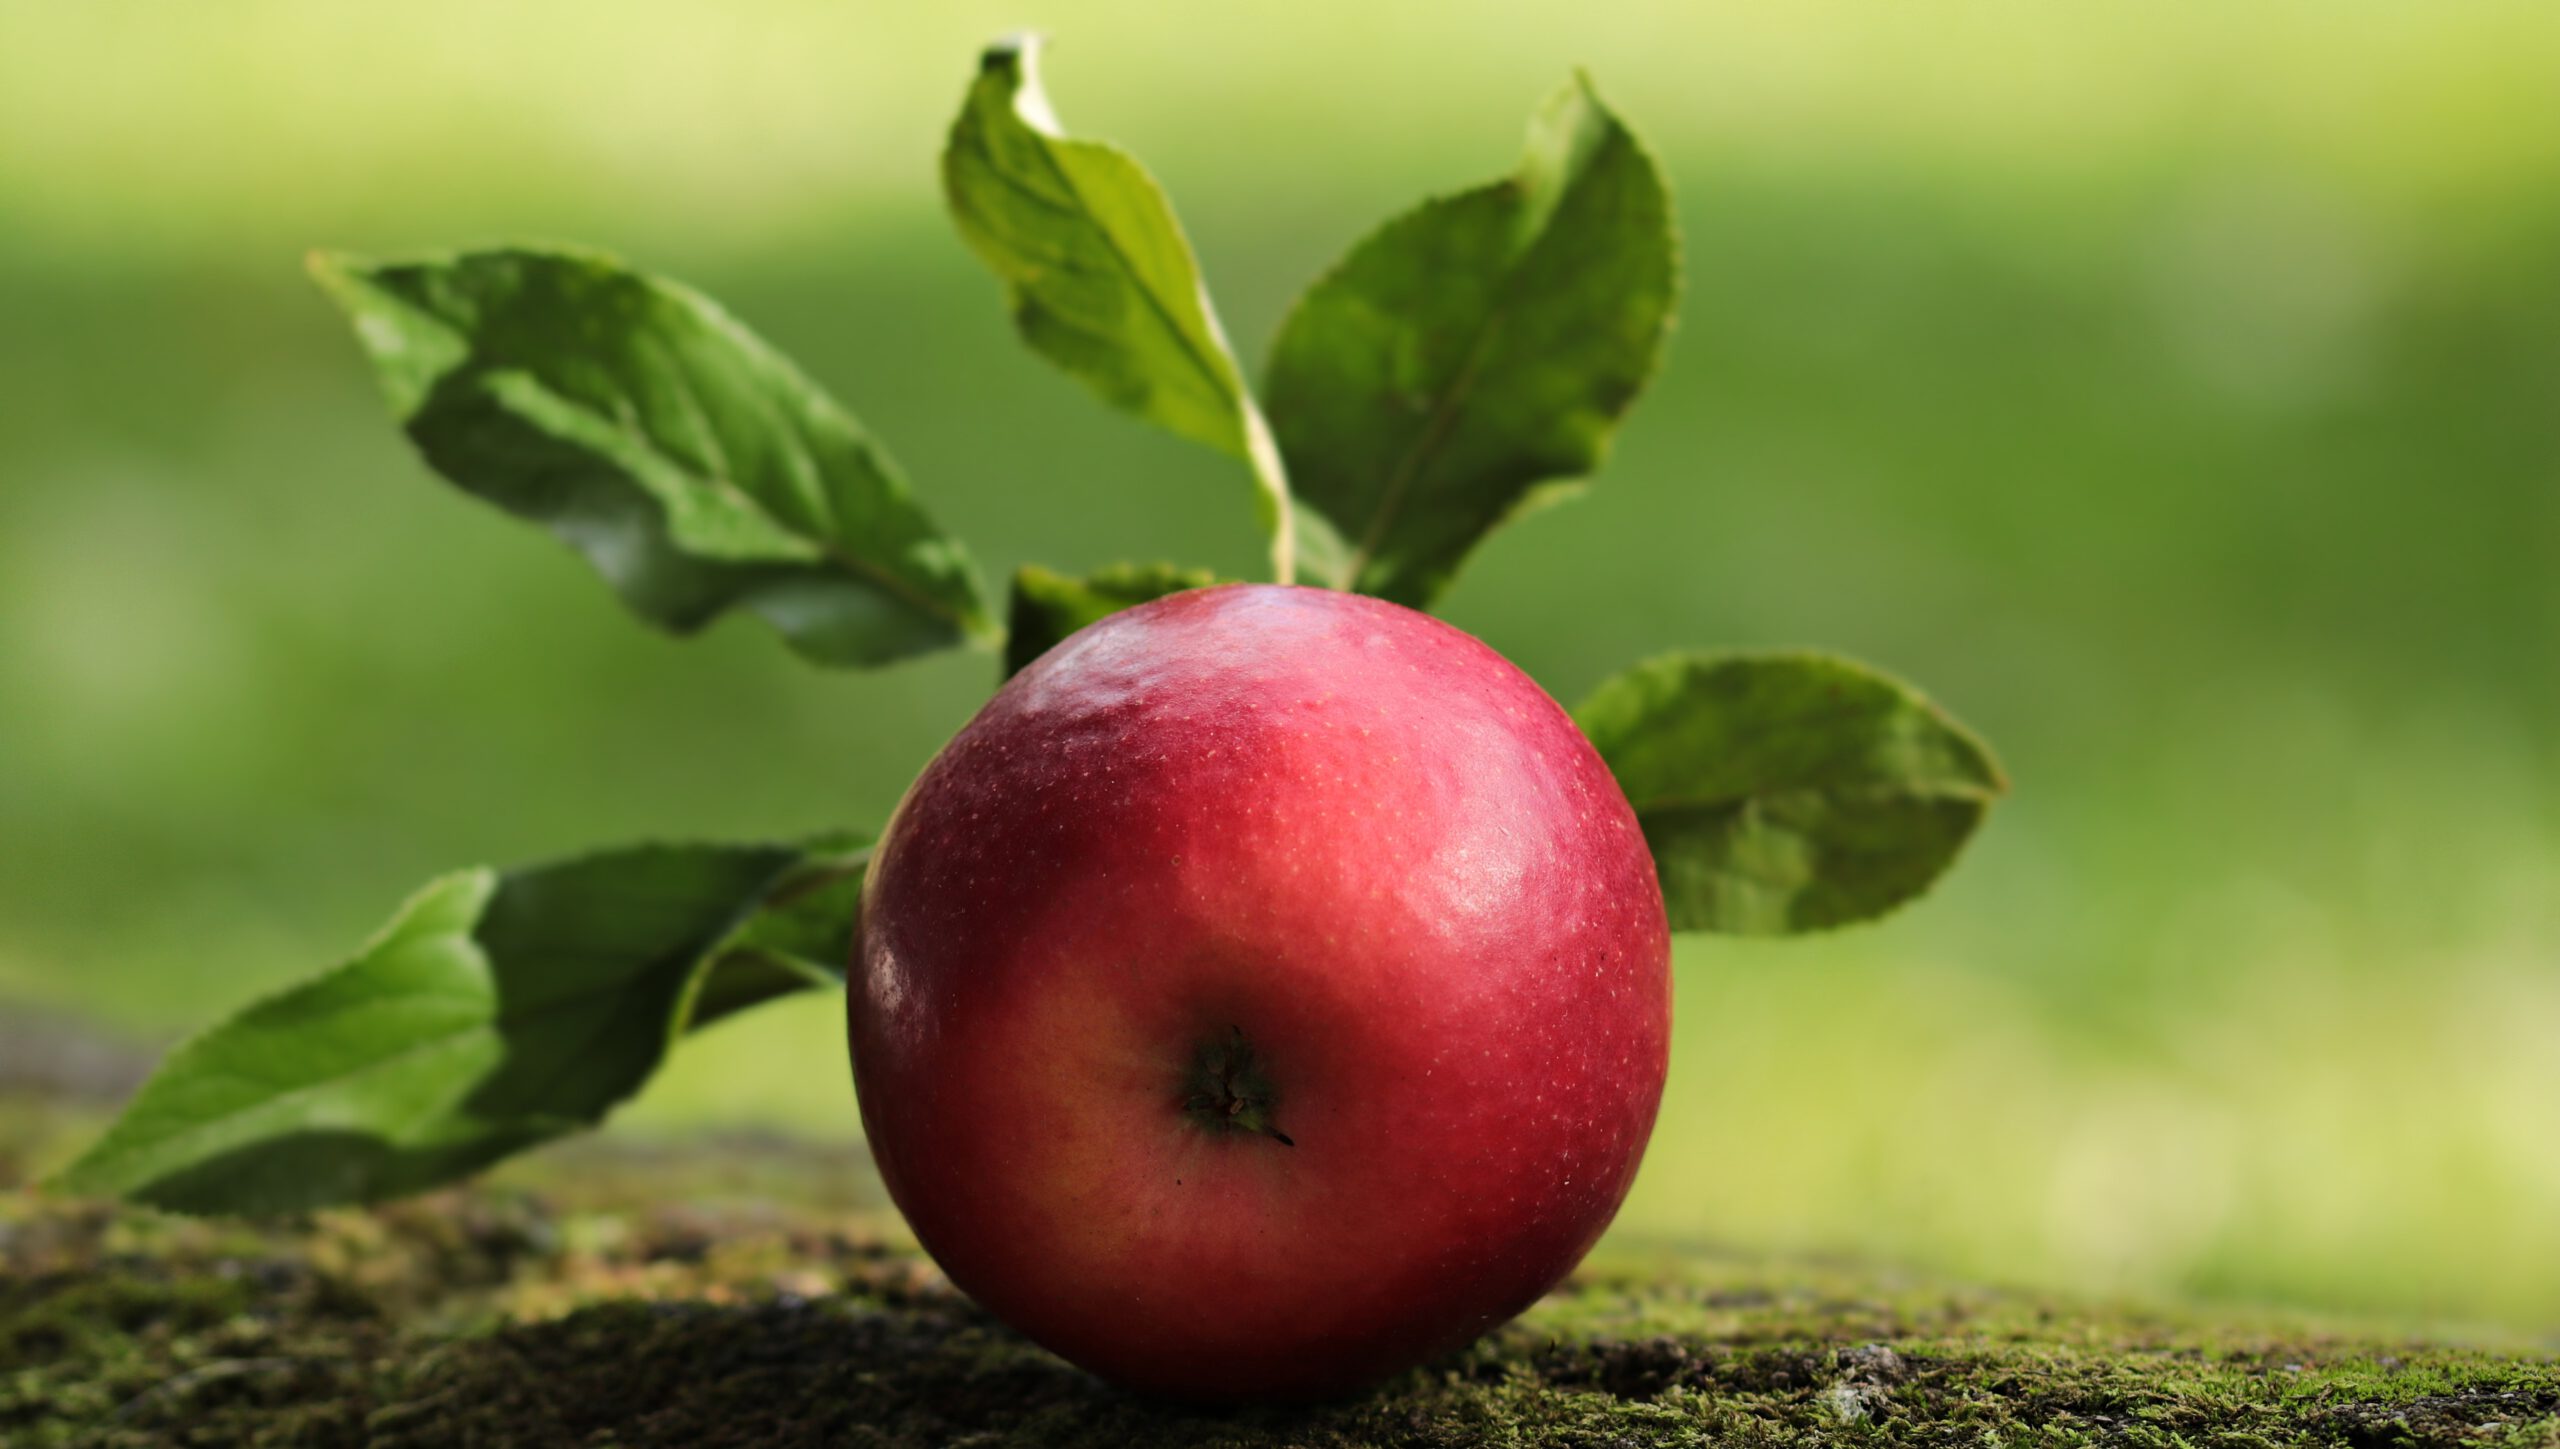 Specialty Crop Block Grant available for the Orchard of the Future collaboration